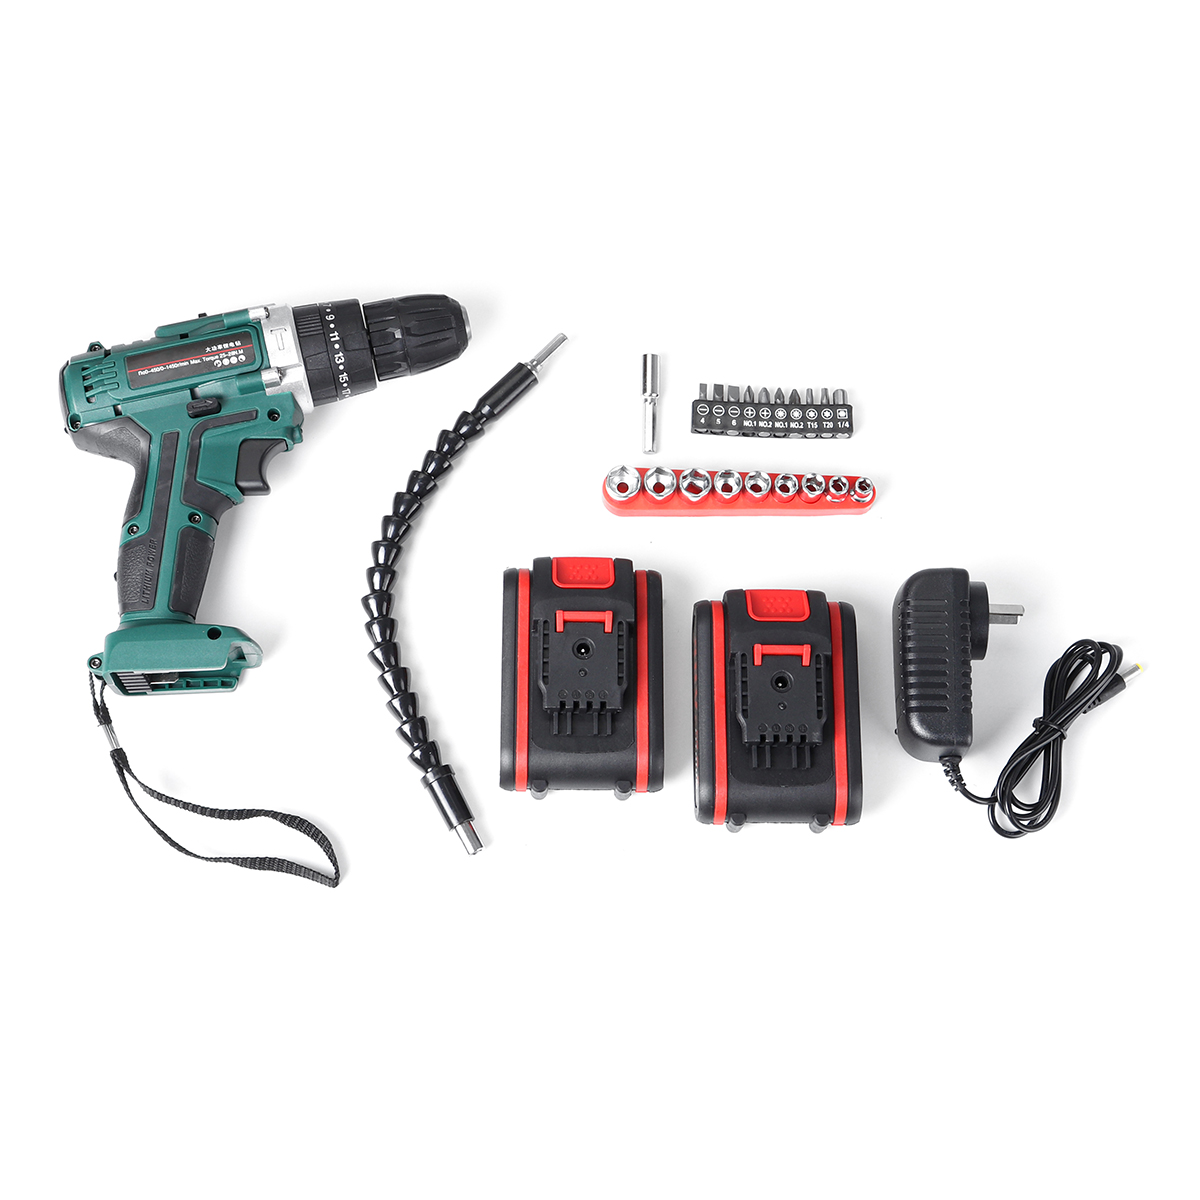 Cordless-Impact-Drill-Driver-HighLow-253-Gears-Speed-2-Battery-Set-1662831-9